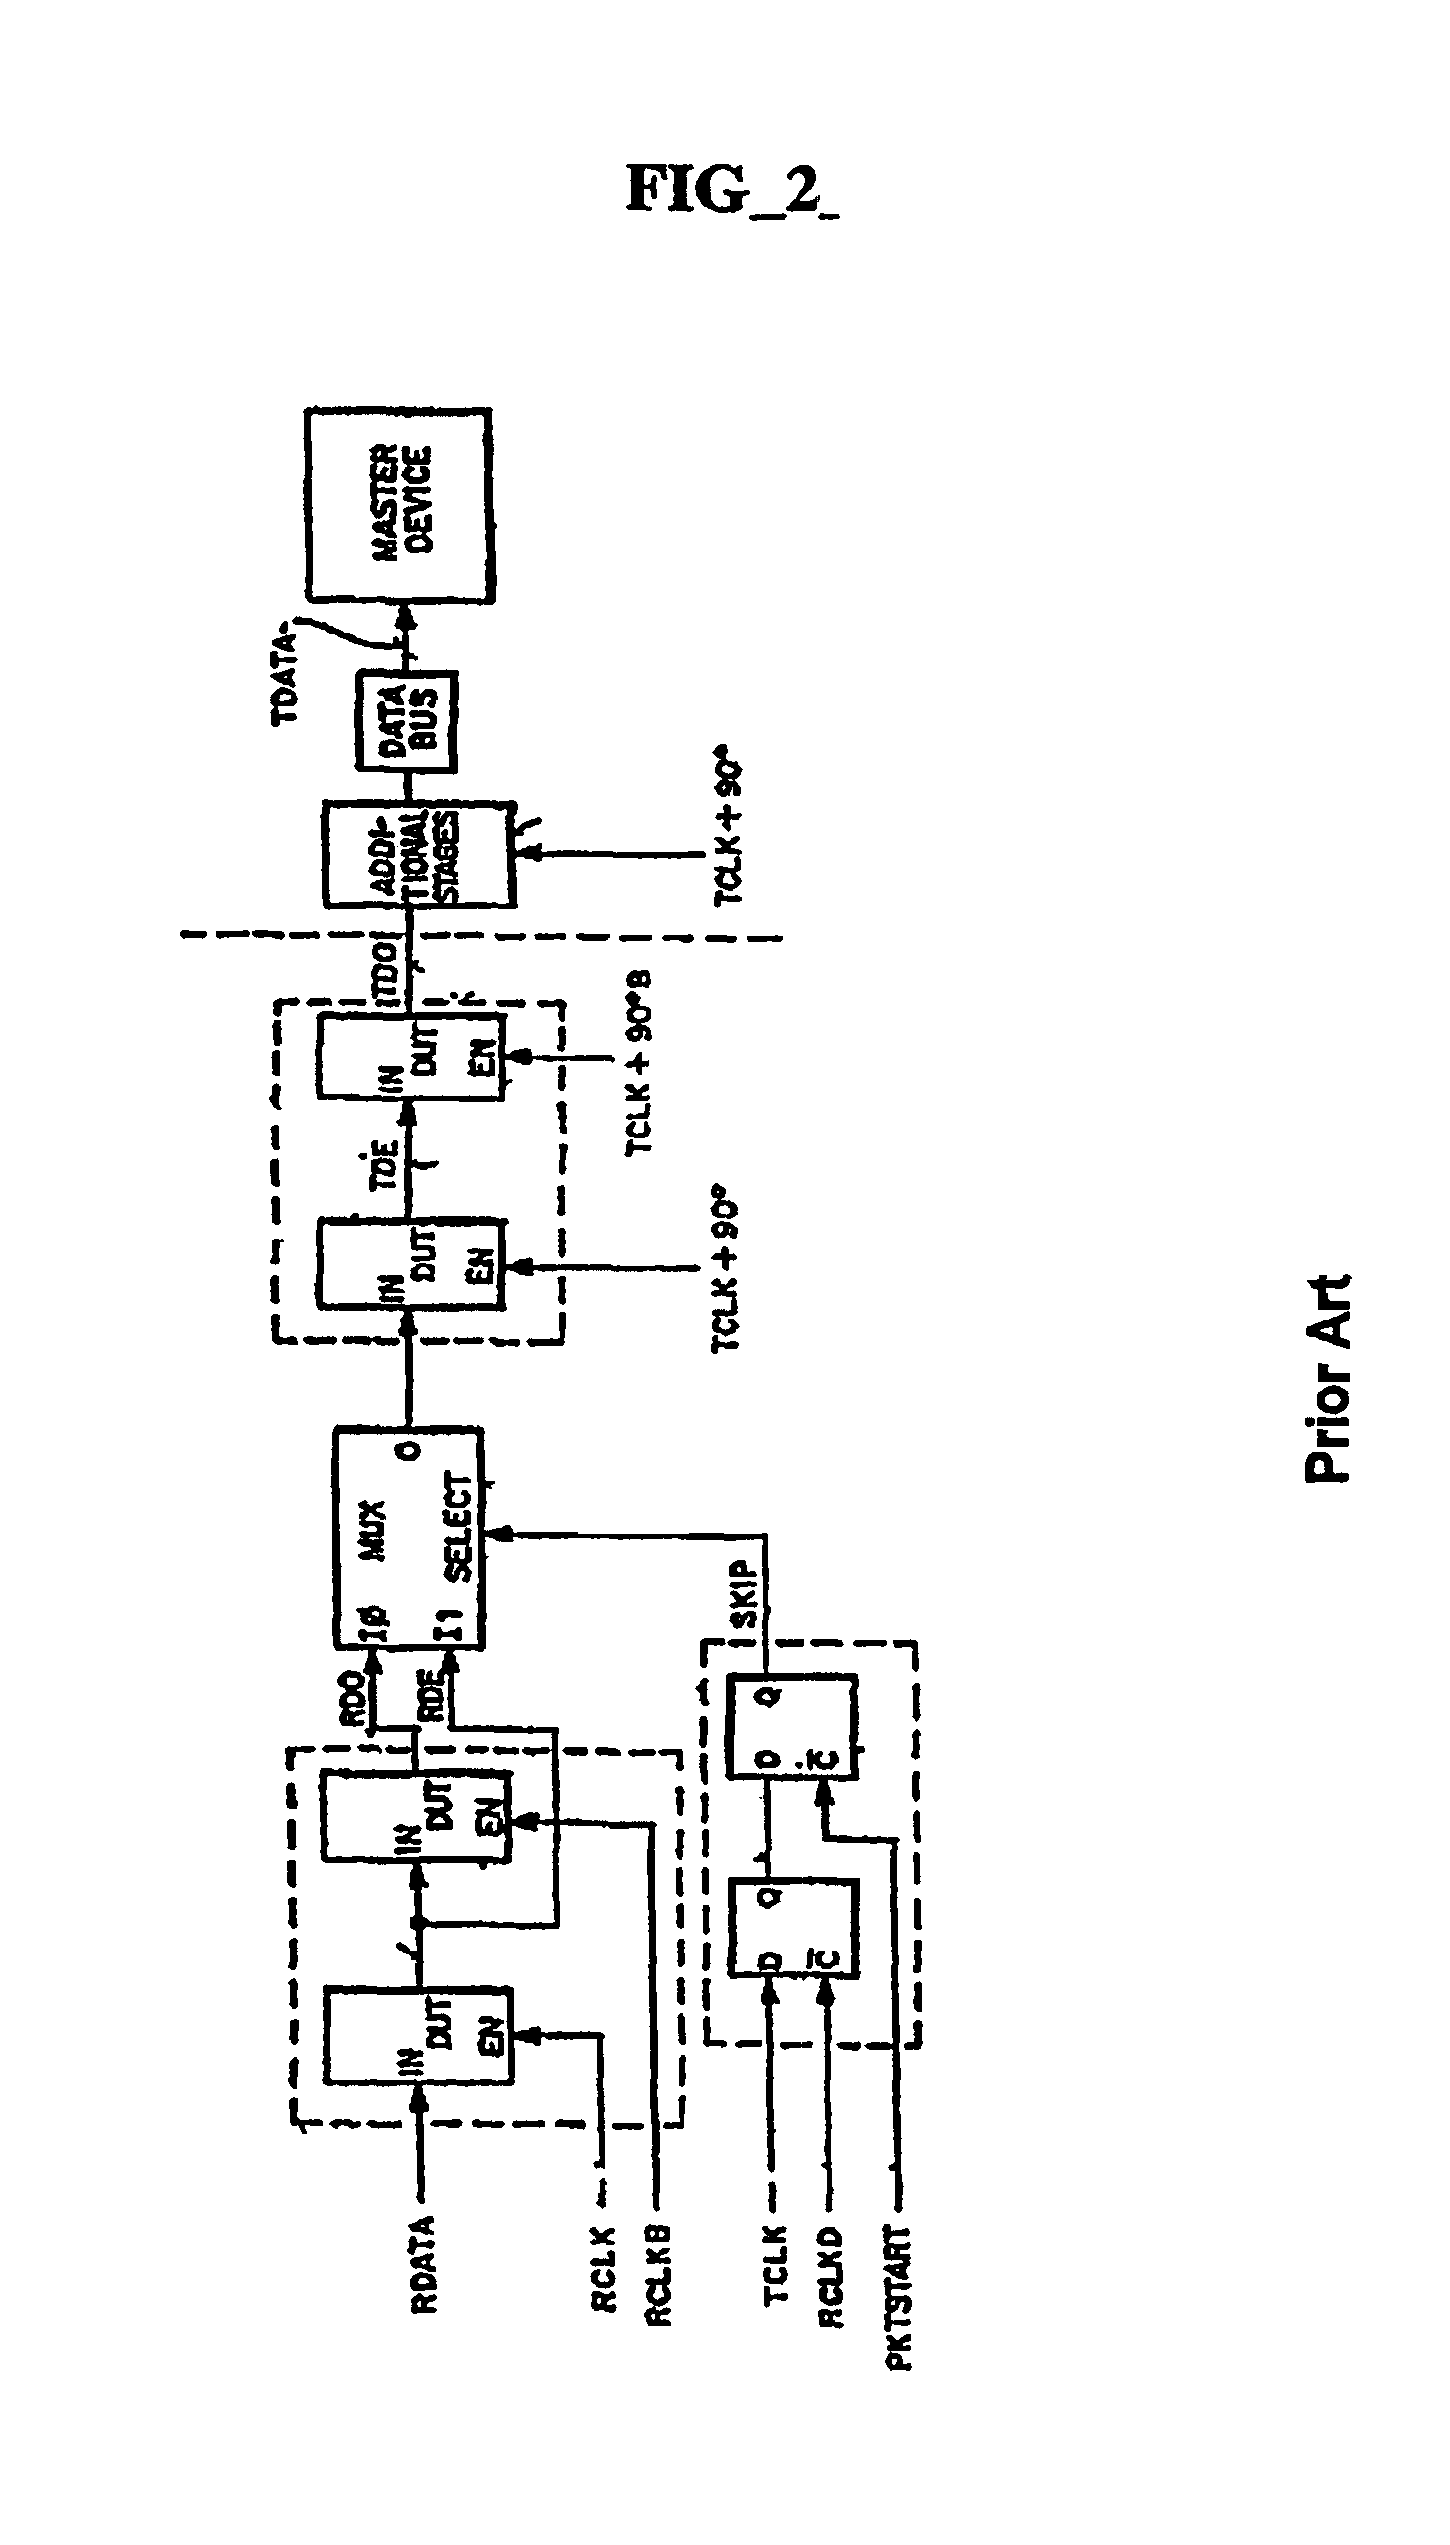 Phase comparator capable of tolerating a non-50% duty-cycle clocks